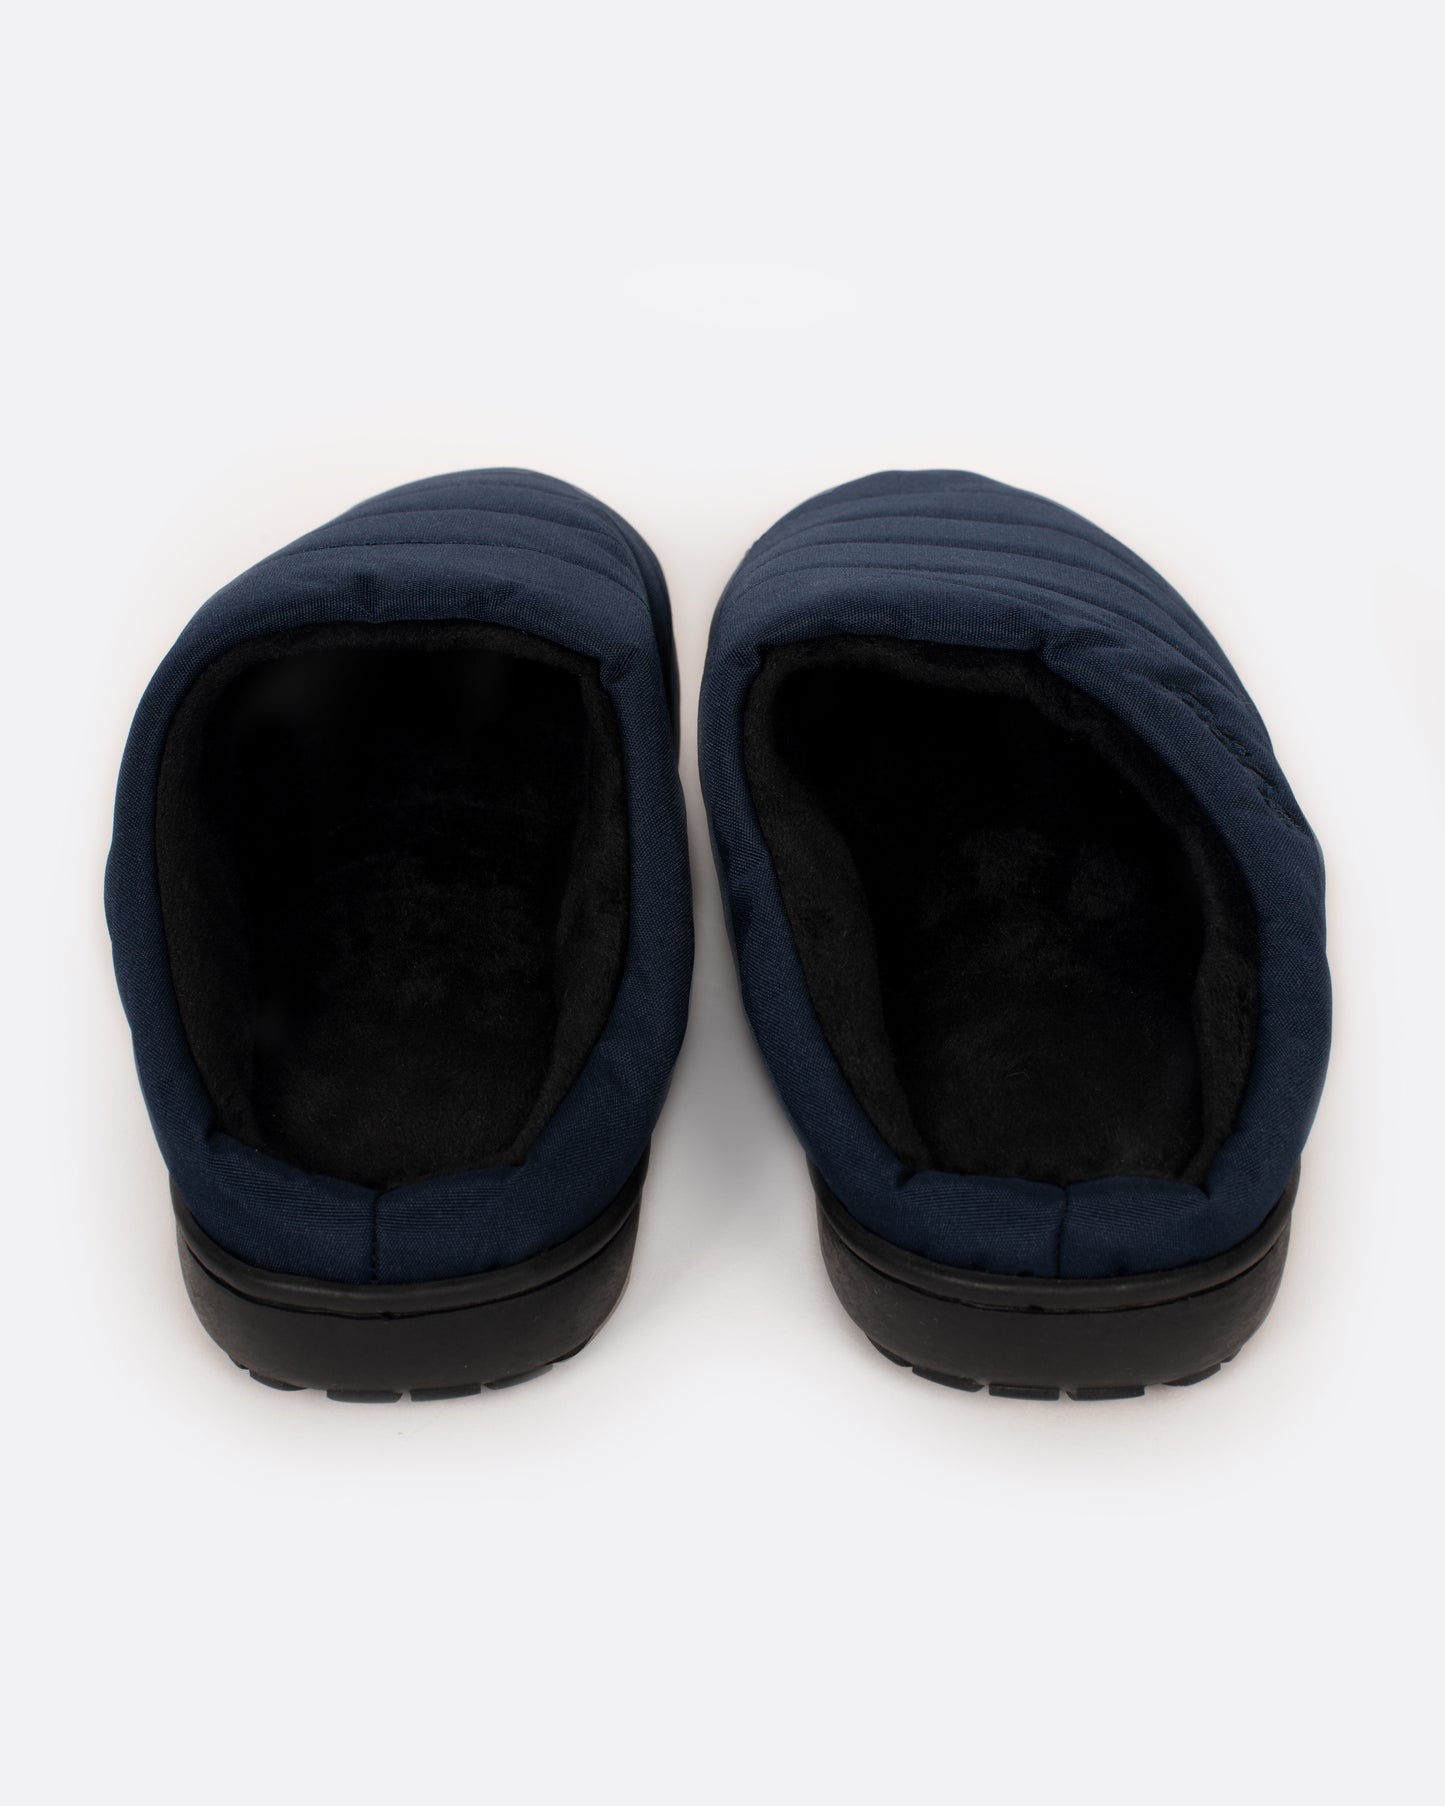 A pair of navy nylon slippers with black rubber soles, shown from the back.